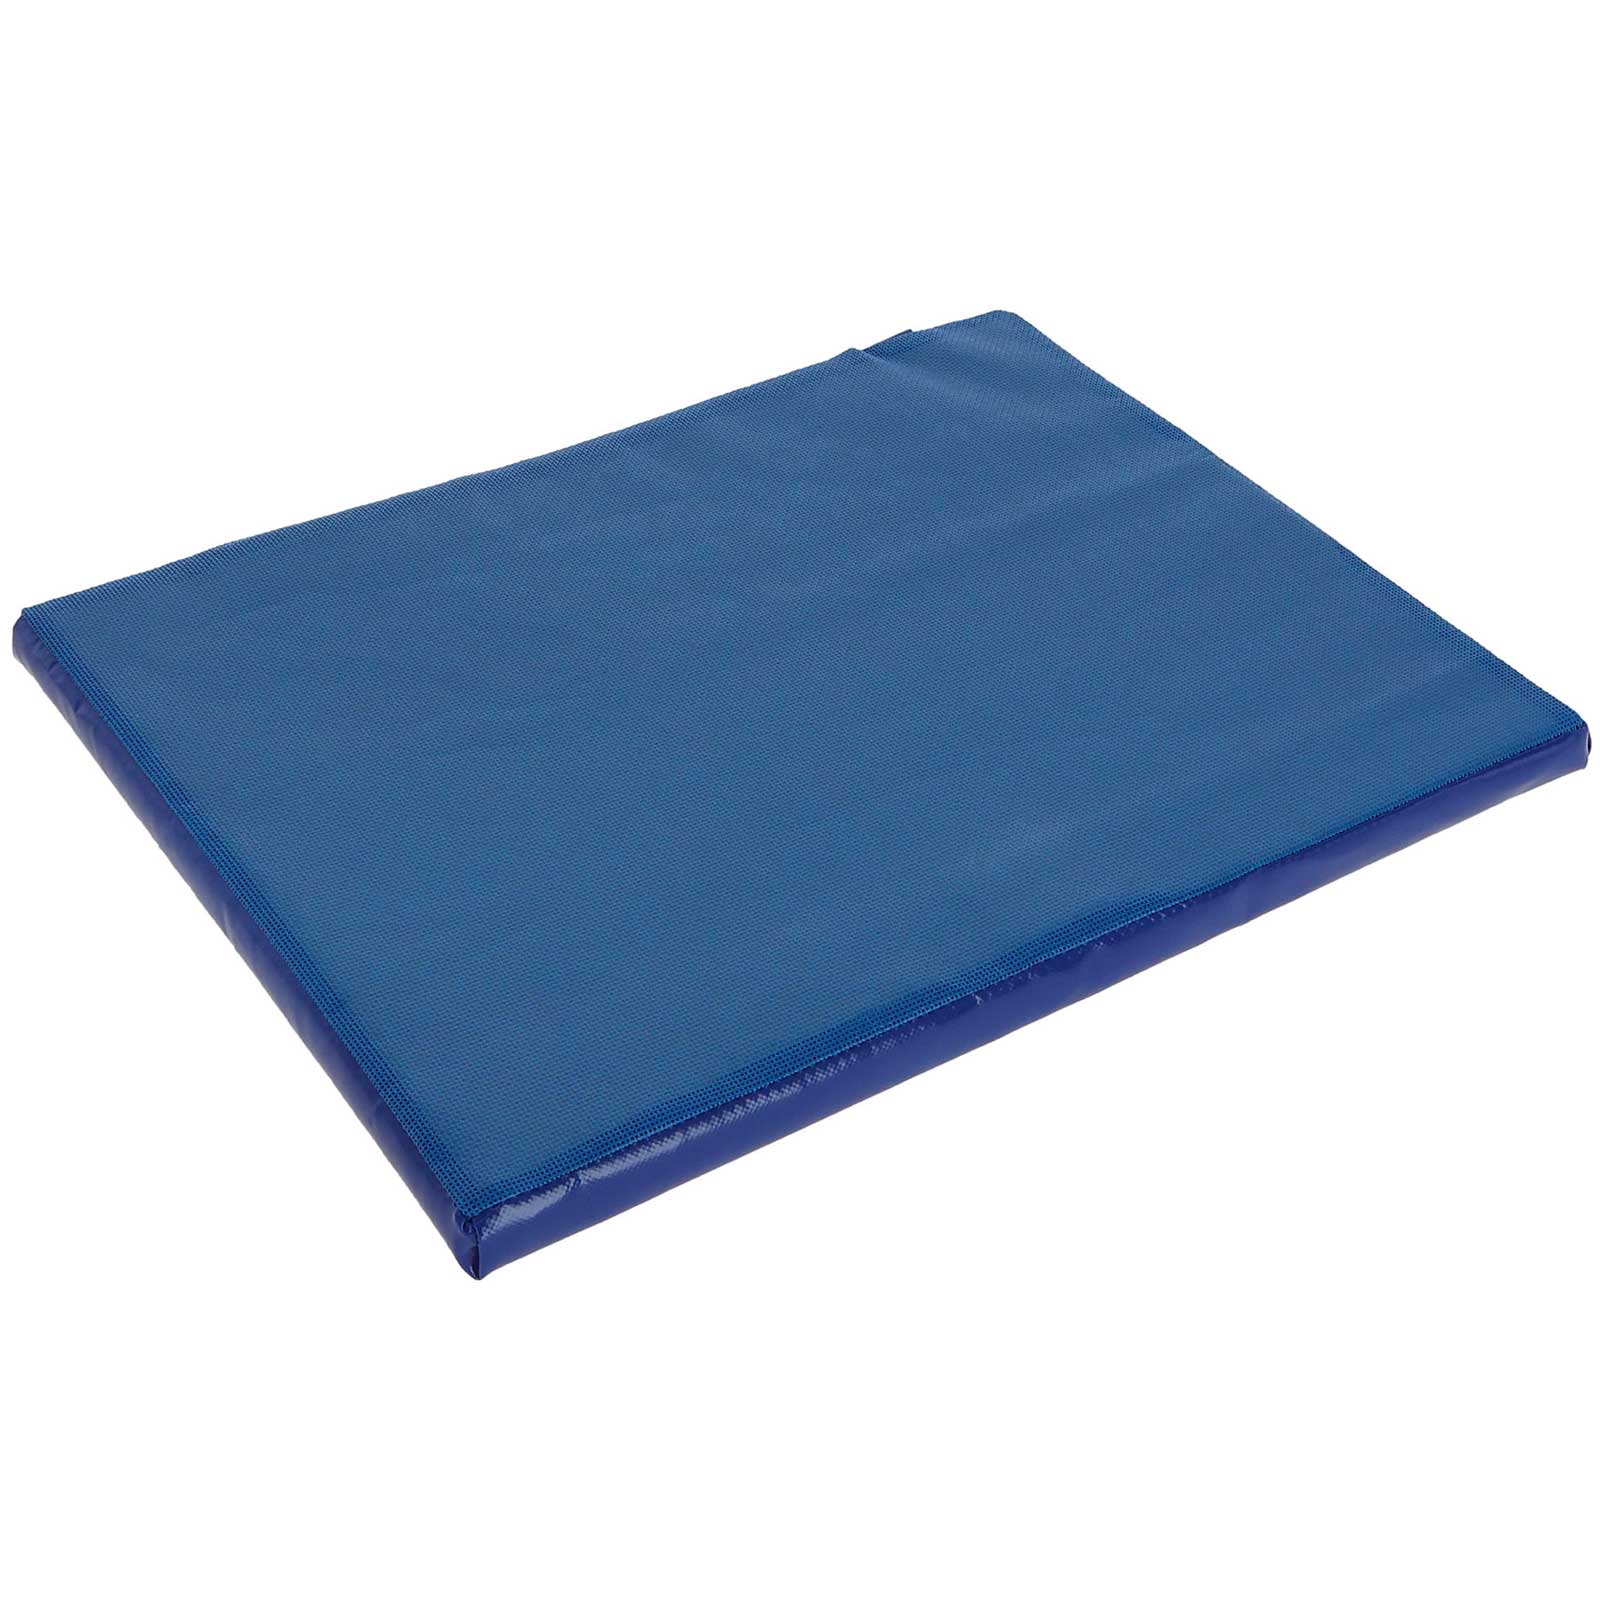 Disinfection mat for shoes